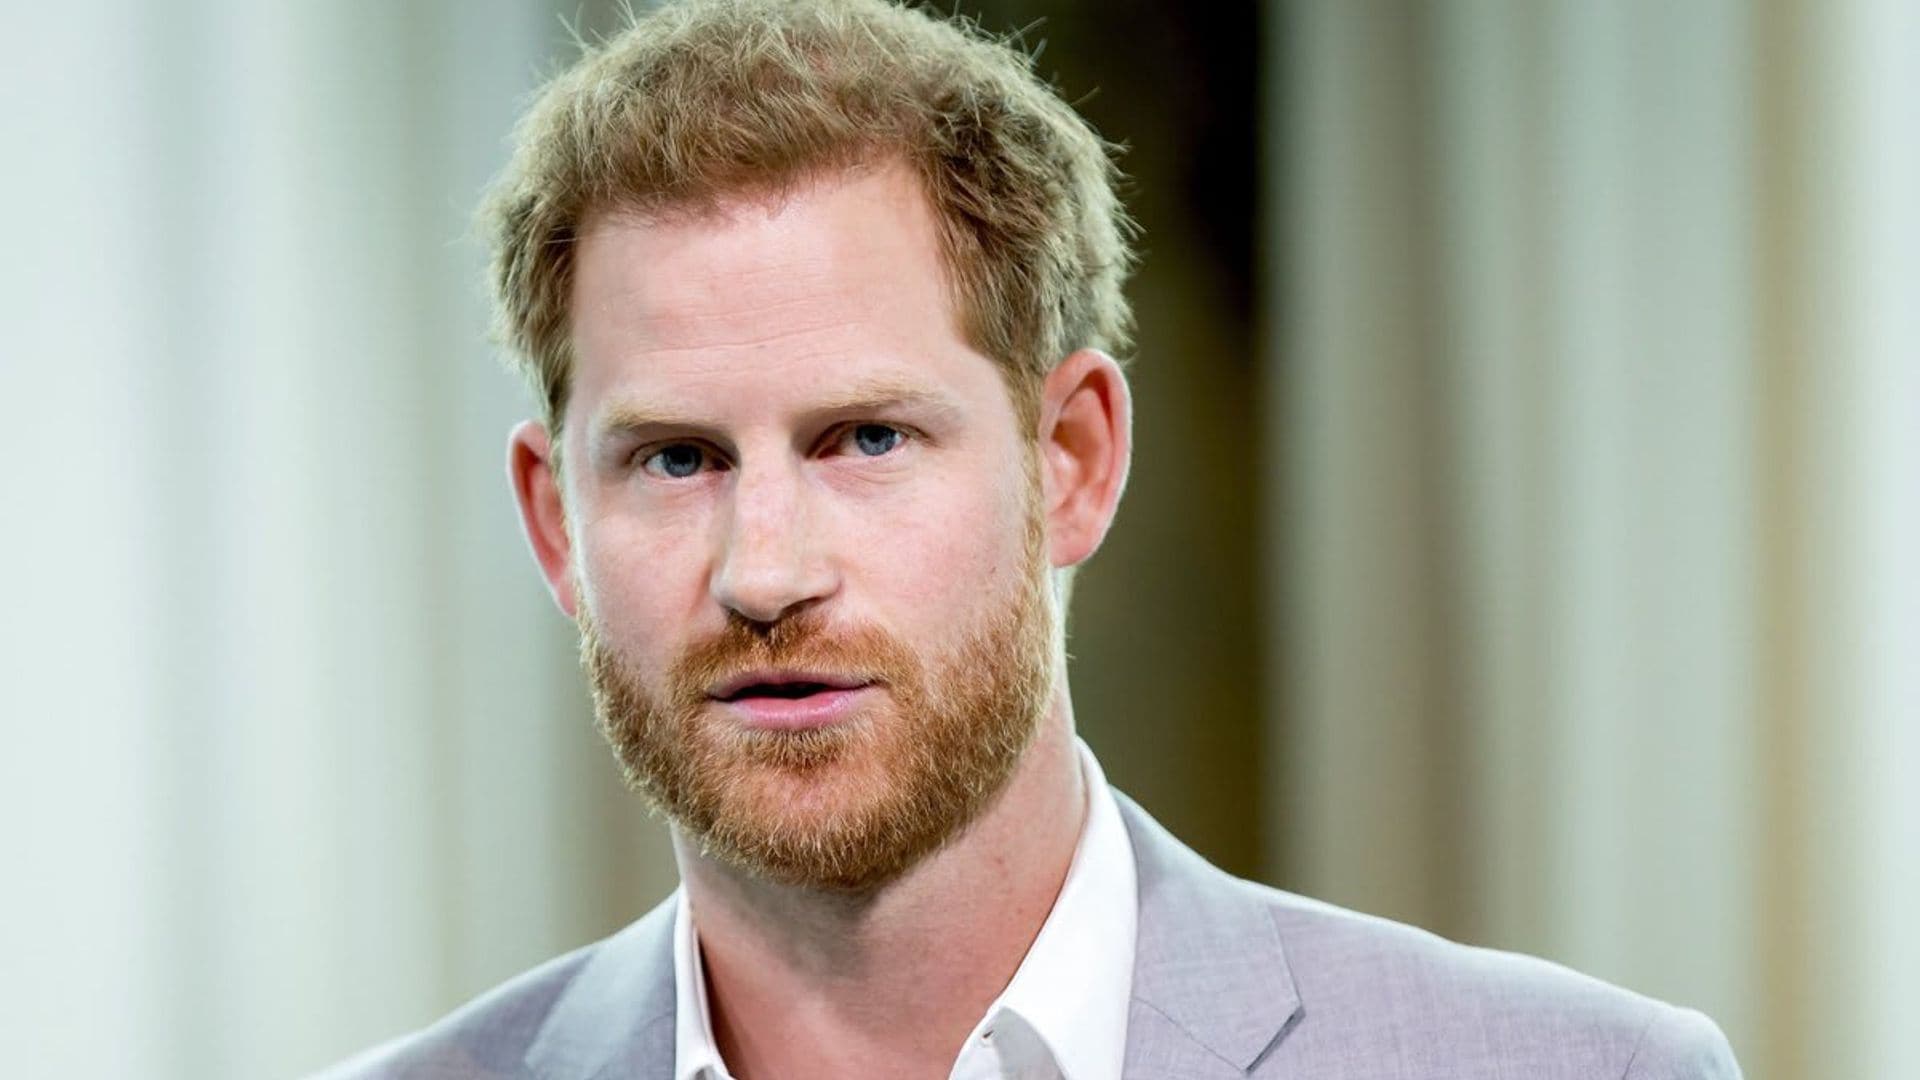 Has Prince Harry spoken with his family about his memoir?